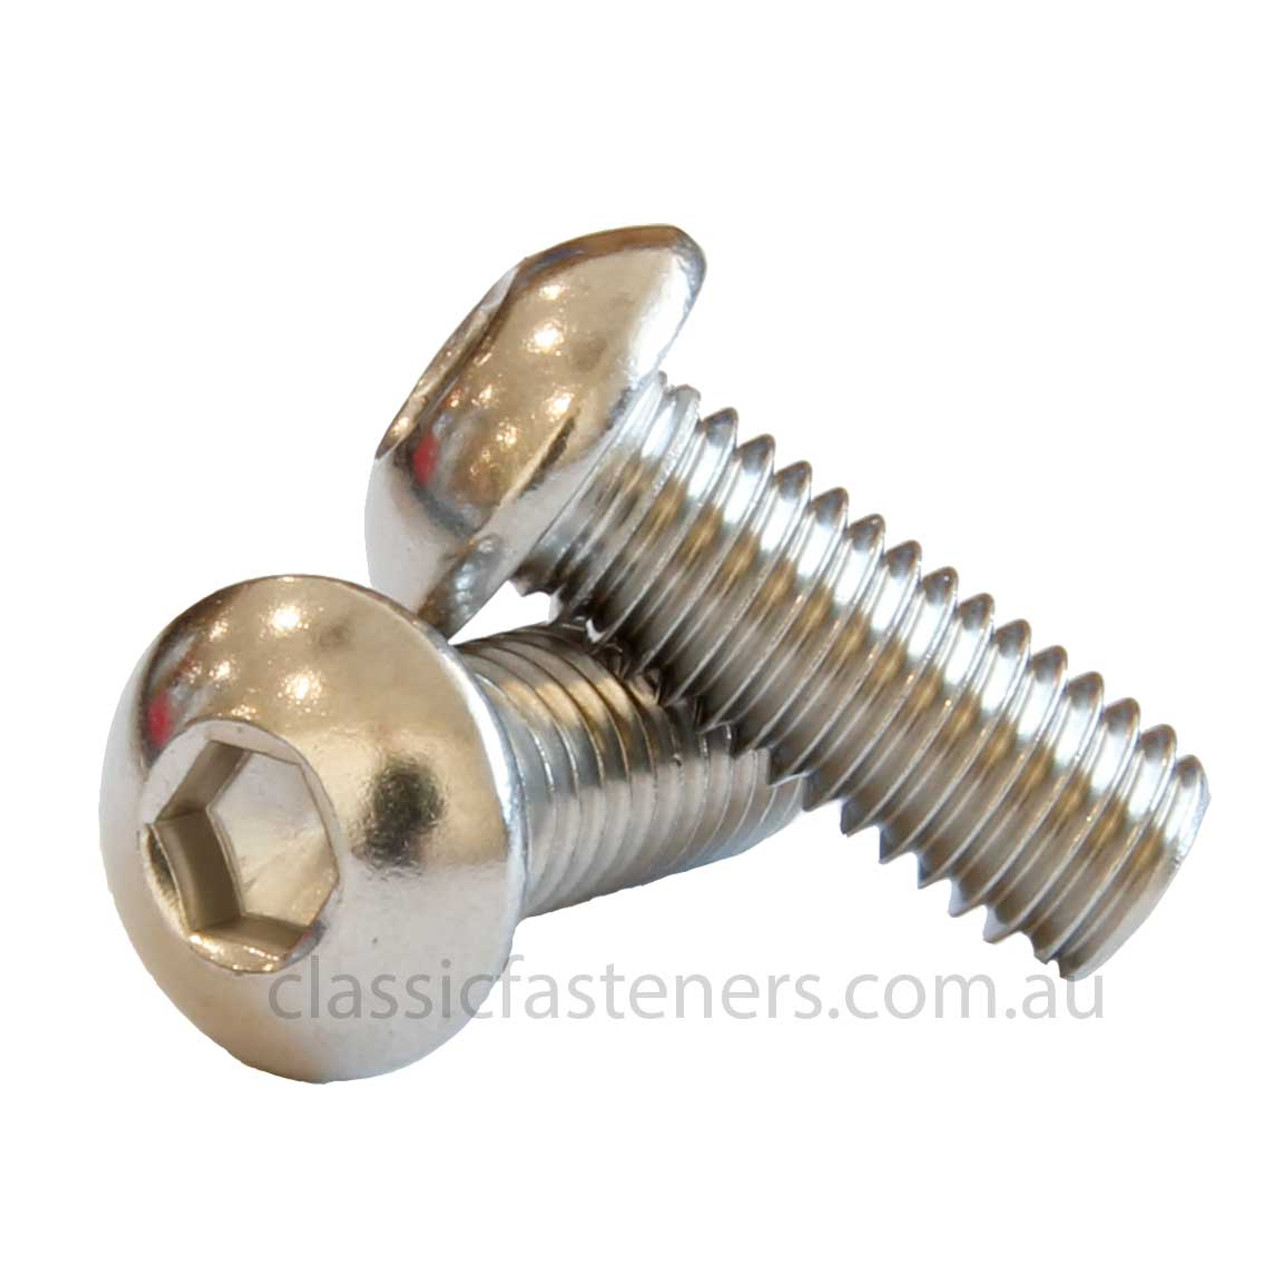 1/4 UNC x 1/2 Button Head Socket Screw Stainless 304